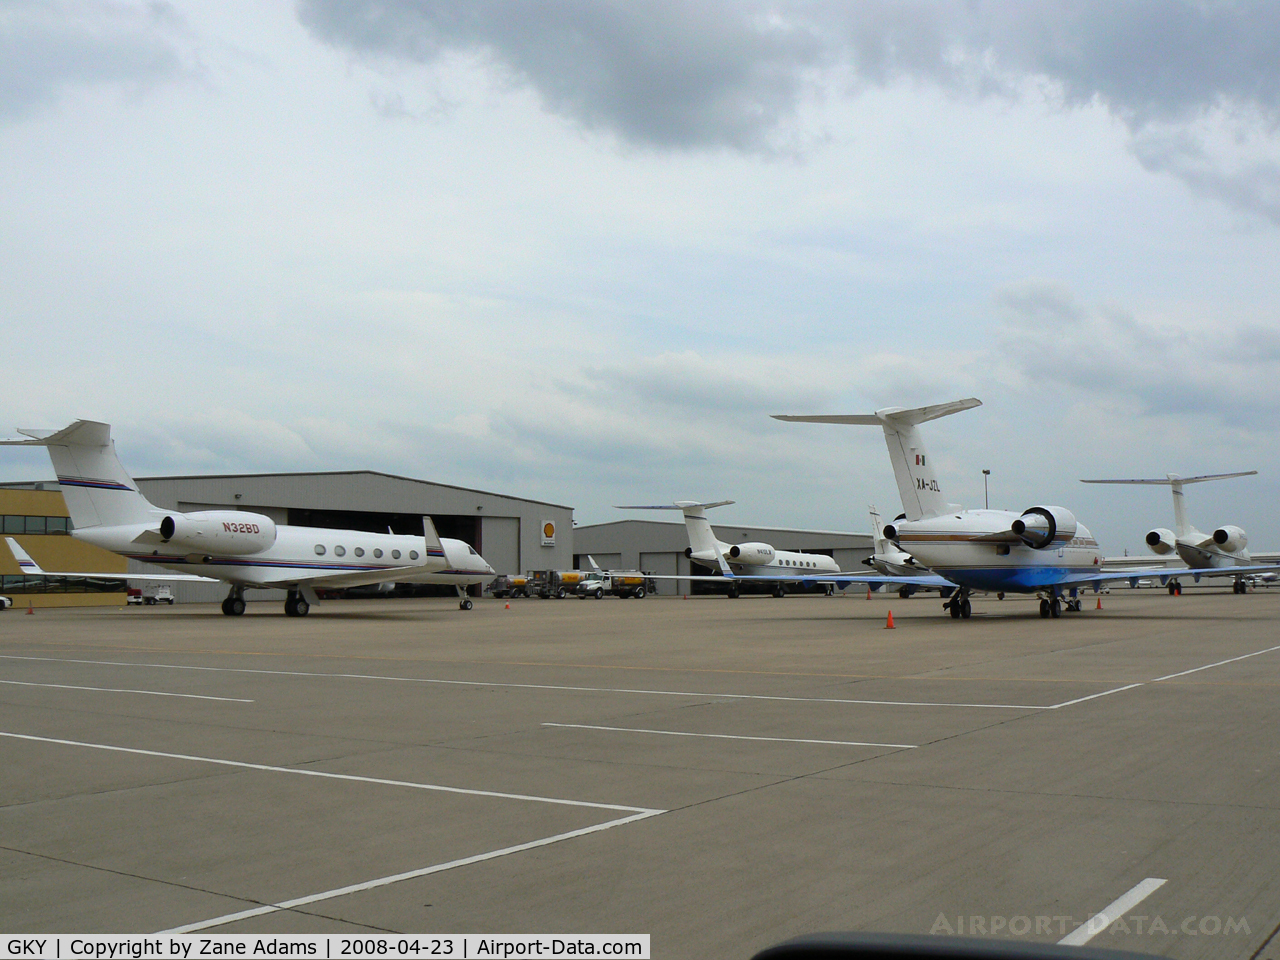 Arlington Municipal Airport (GKY) - Invasion of the Biz Jets - THREE Lockheed Martin, Black and Decker, Misc GV, Cessna Jet, and one from Mexico along with the small ones...